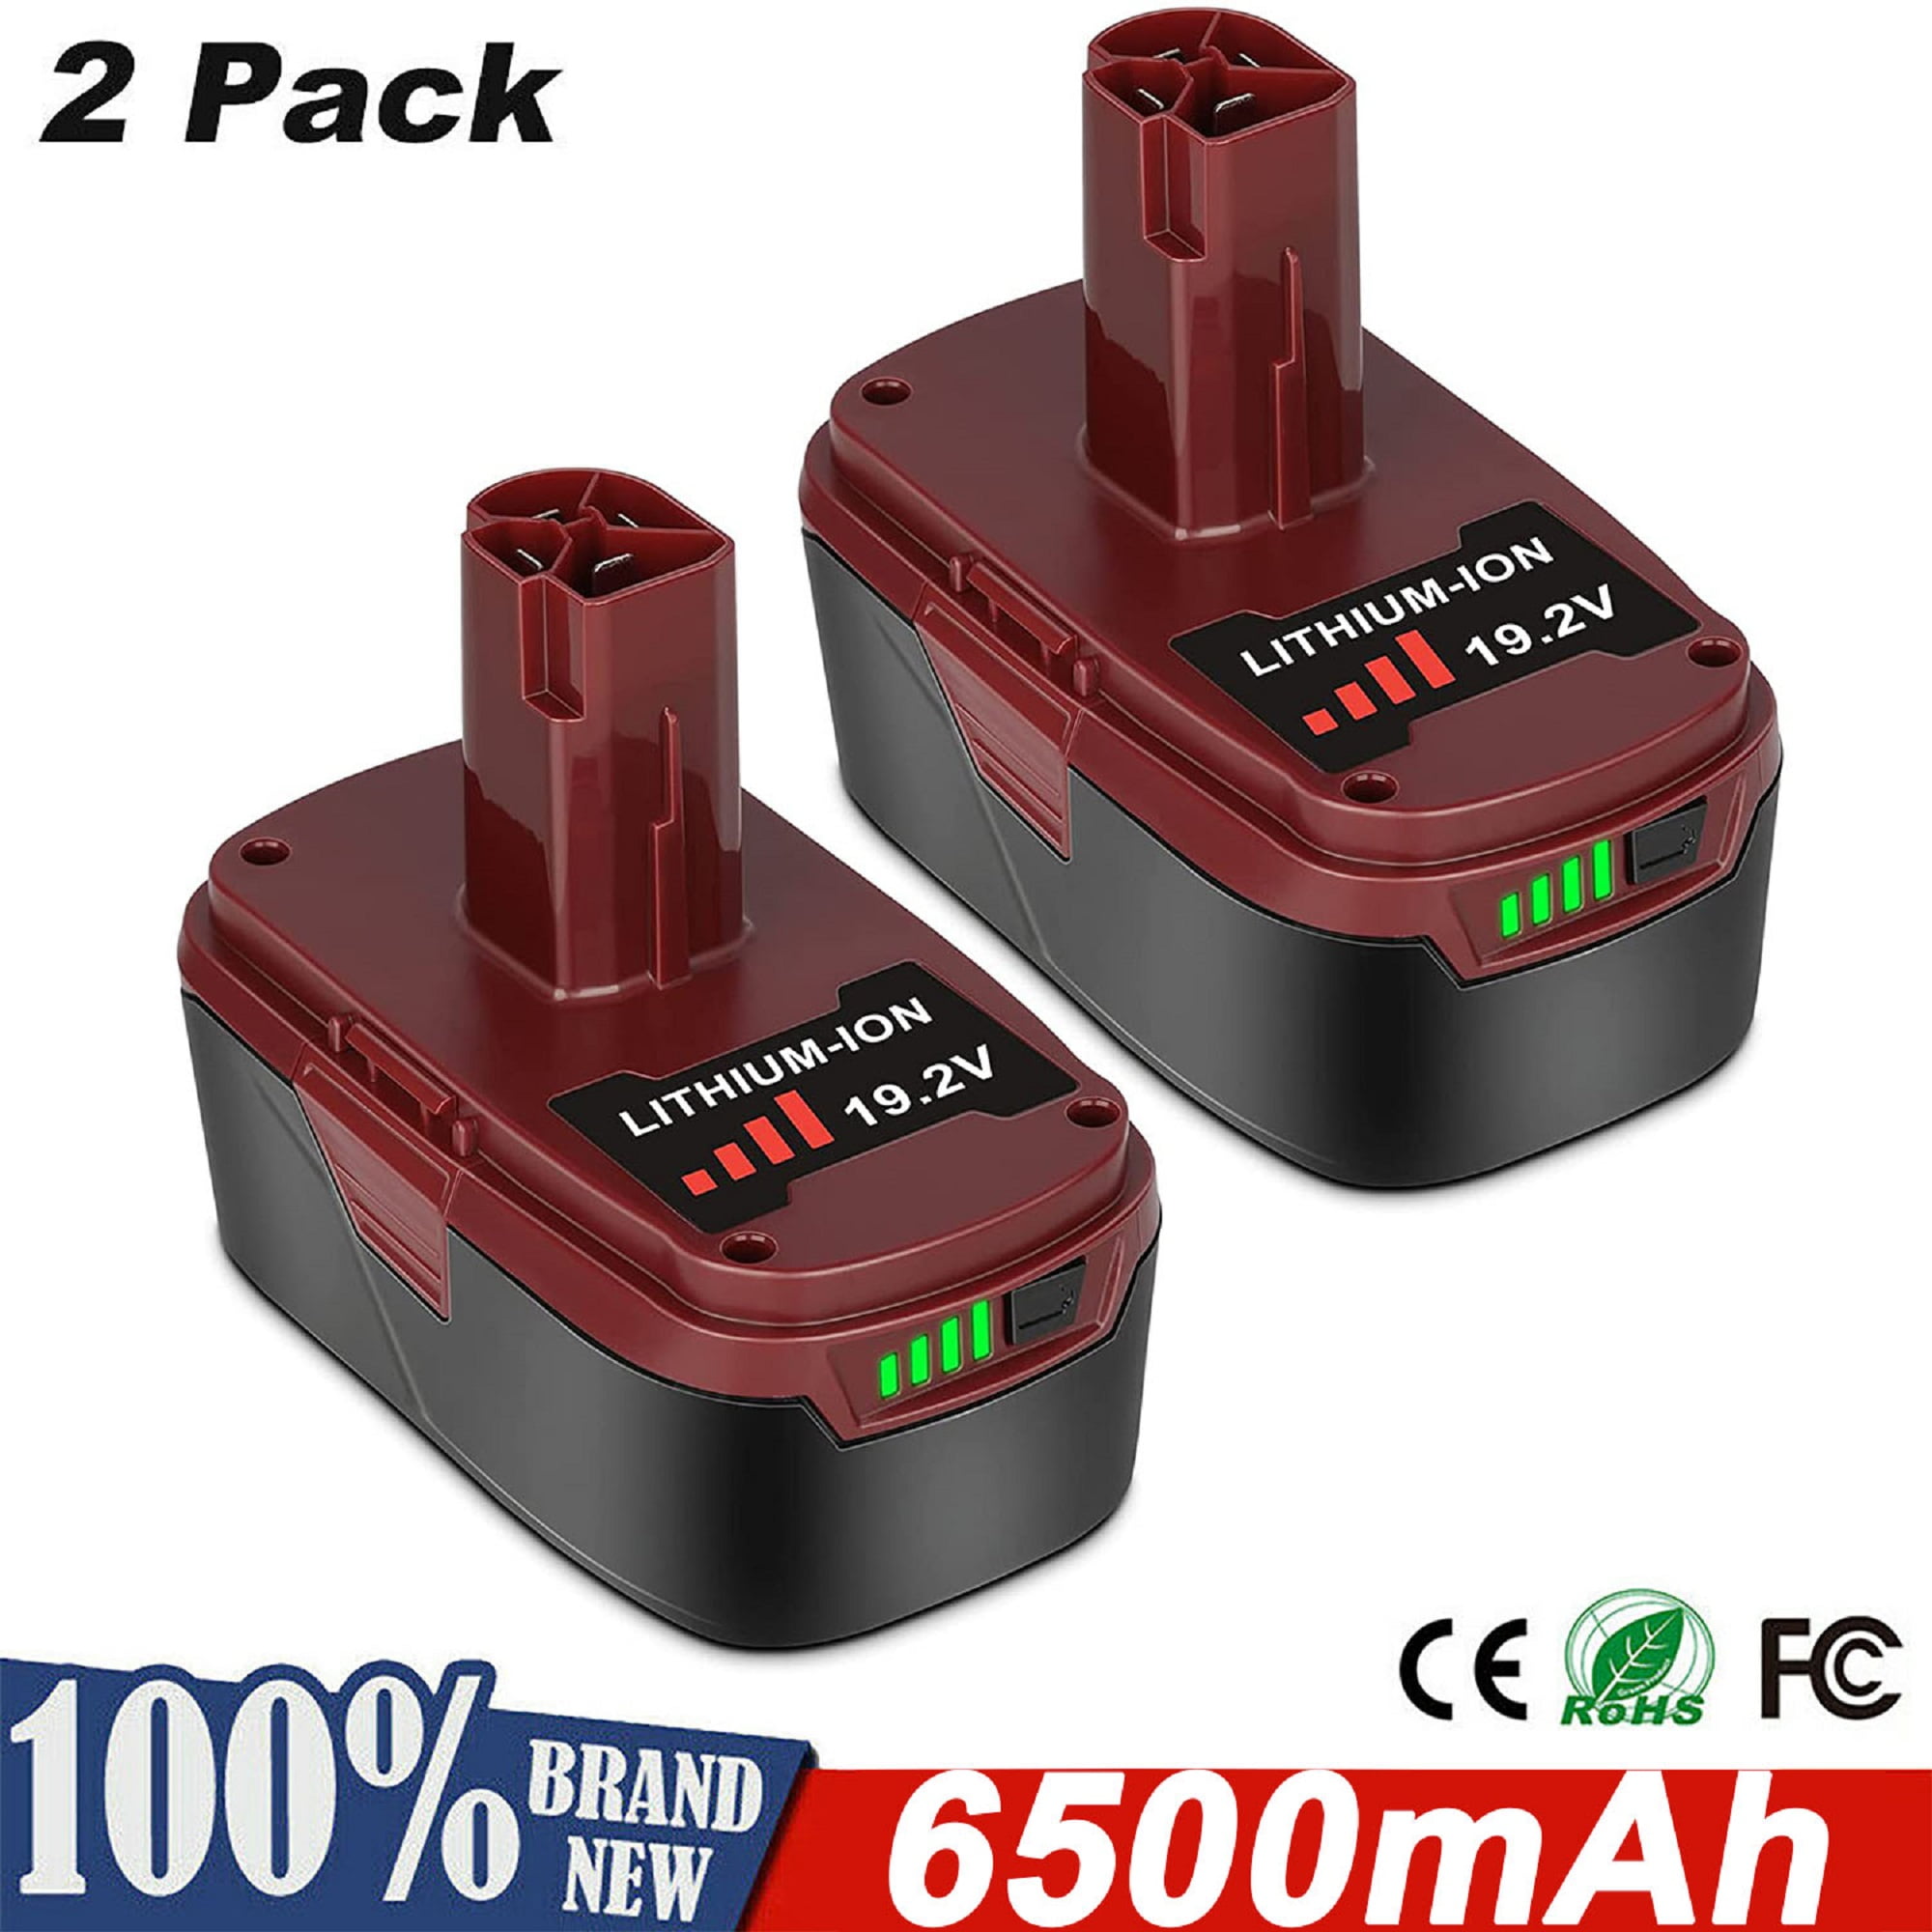 2 Packs 6.0Ah 19.2V C3 Replace for Craftsman 19.2 Volt Lithium-ion Battery XCP DieHard 315.115410 315.11485 130279005 1323903 120235021 11375 11376 Cordless Battery 